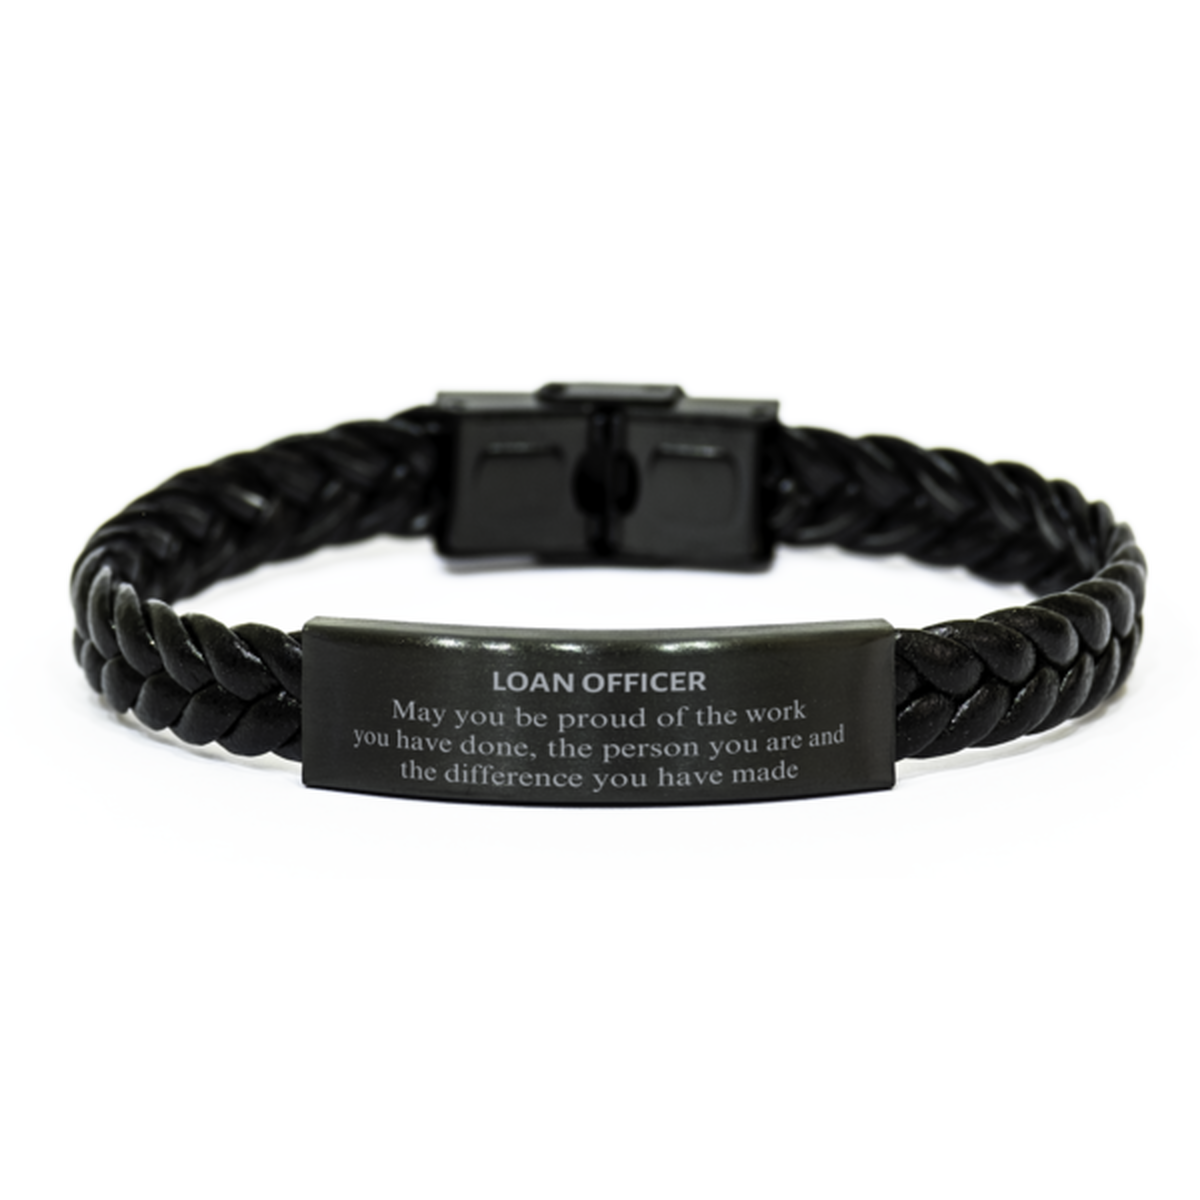 Loan Officer May you be proud of the work you have done, Retirement Loan Officer Braided Leather Bracelet for Colleague Appreciation Gifts Amazing for Loan Officer